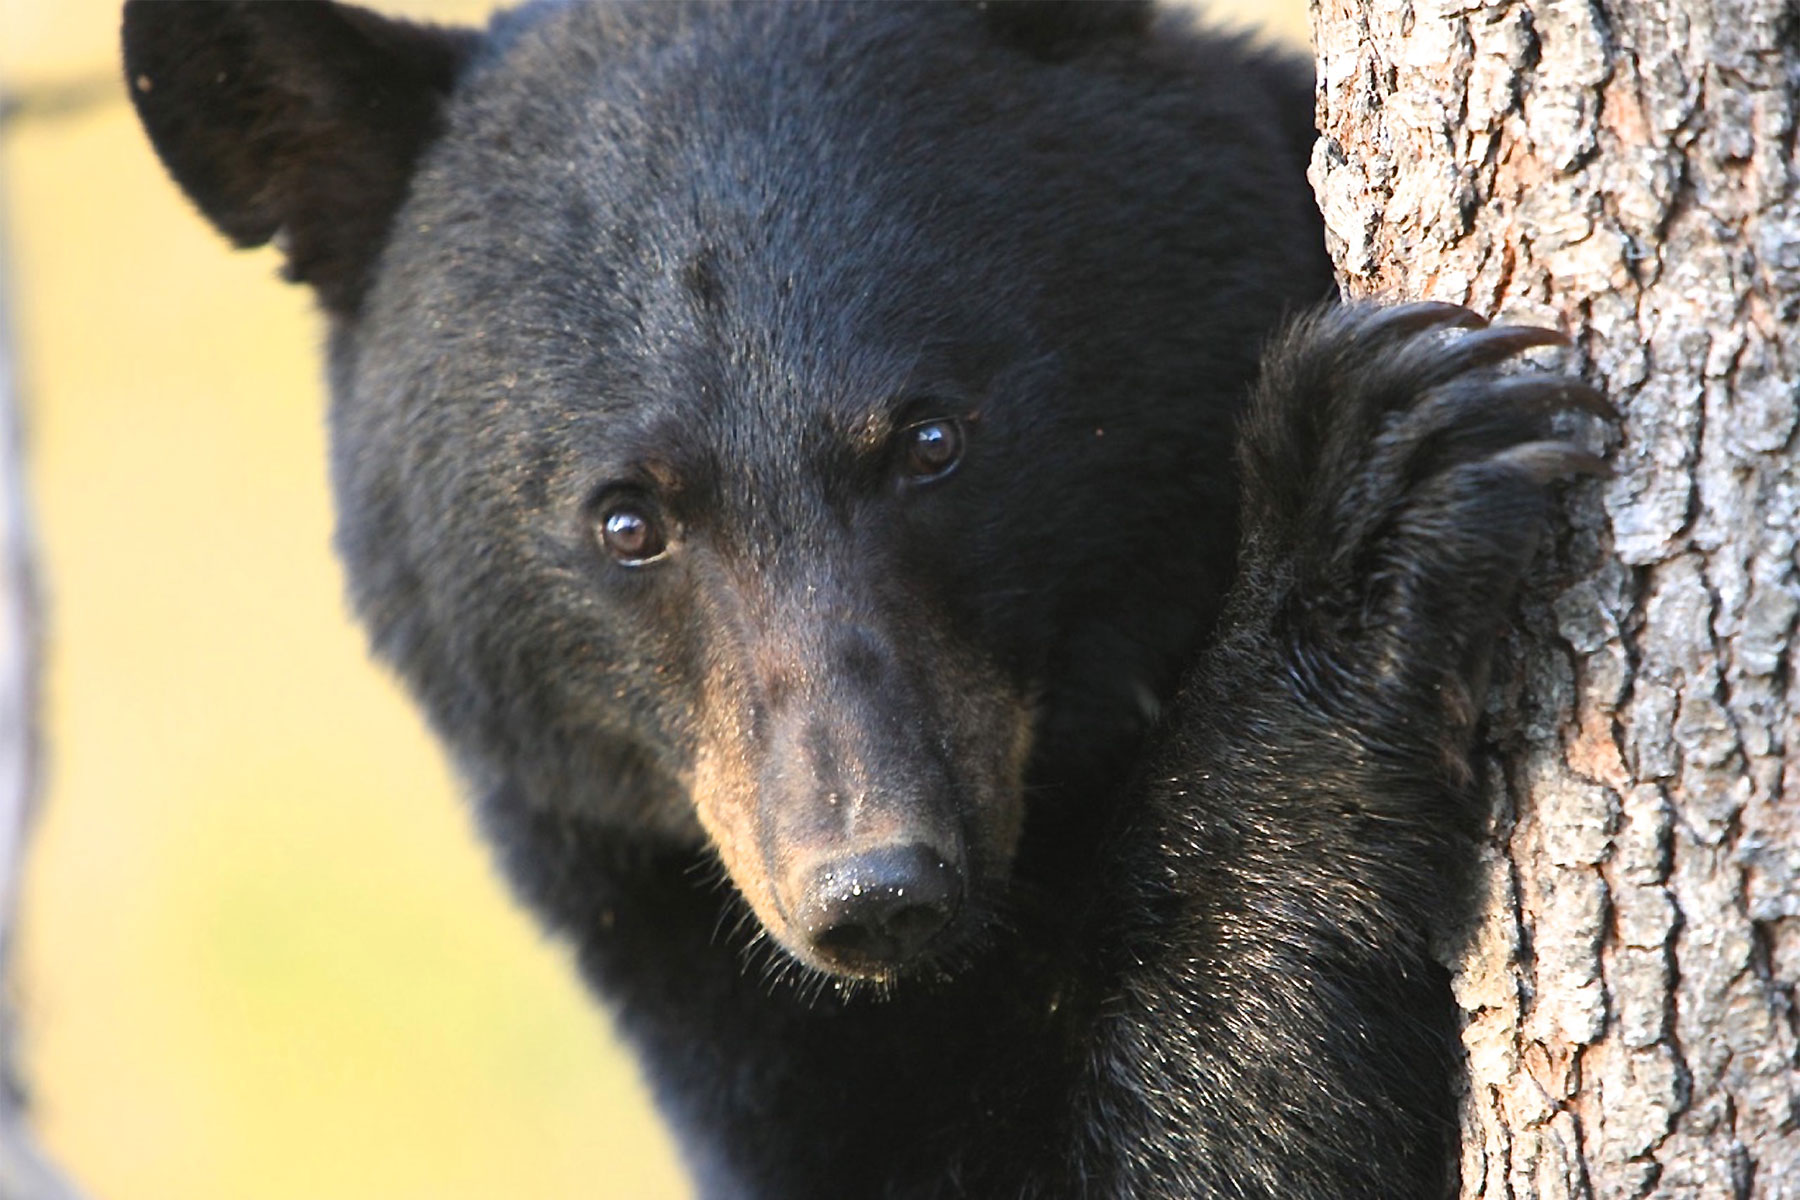 Nationally Recognized Wildlife Biologist to Present Talk on Black Bears Wednesday, Oct 26 in Chester